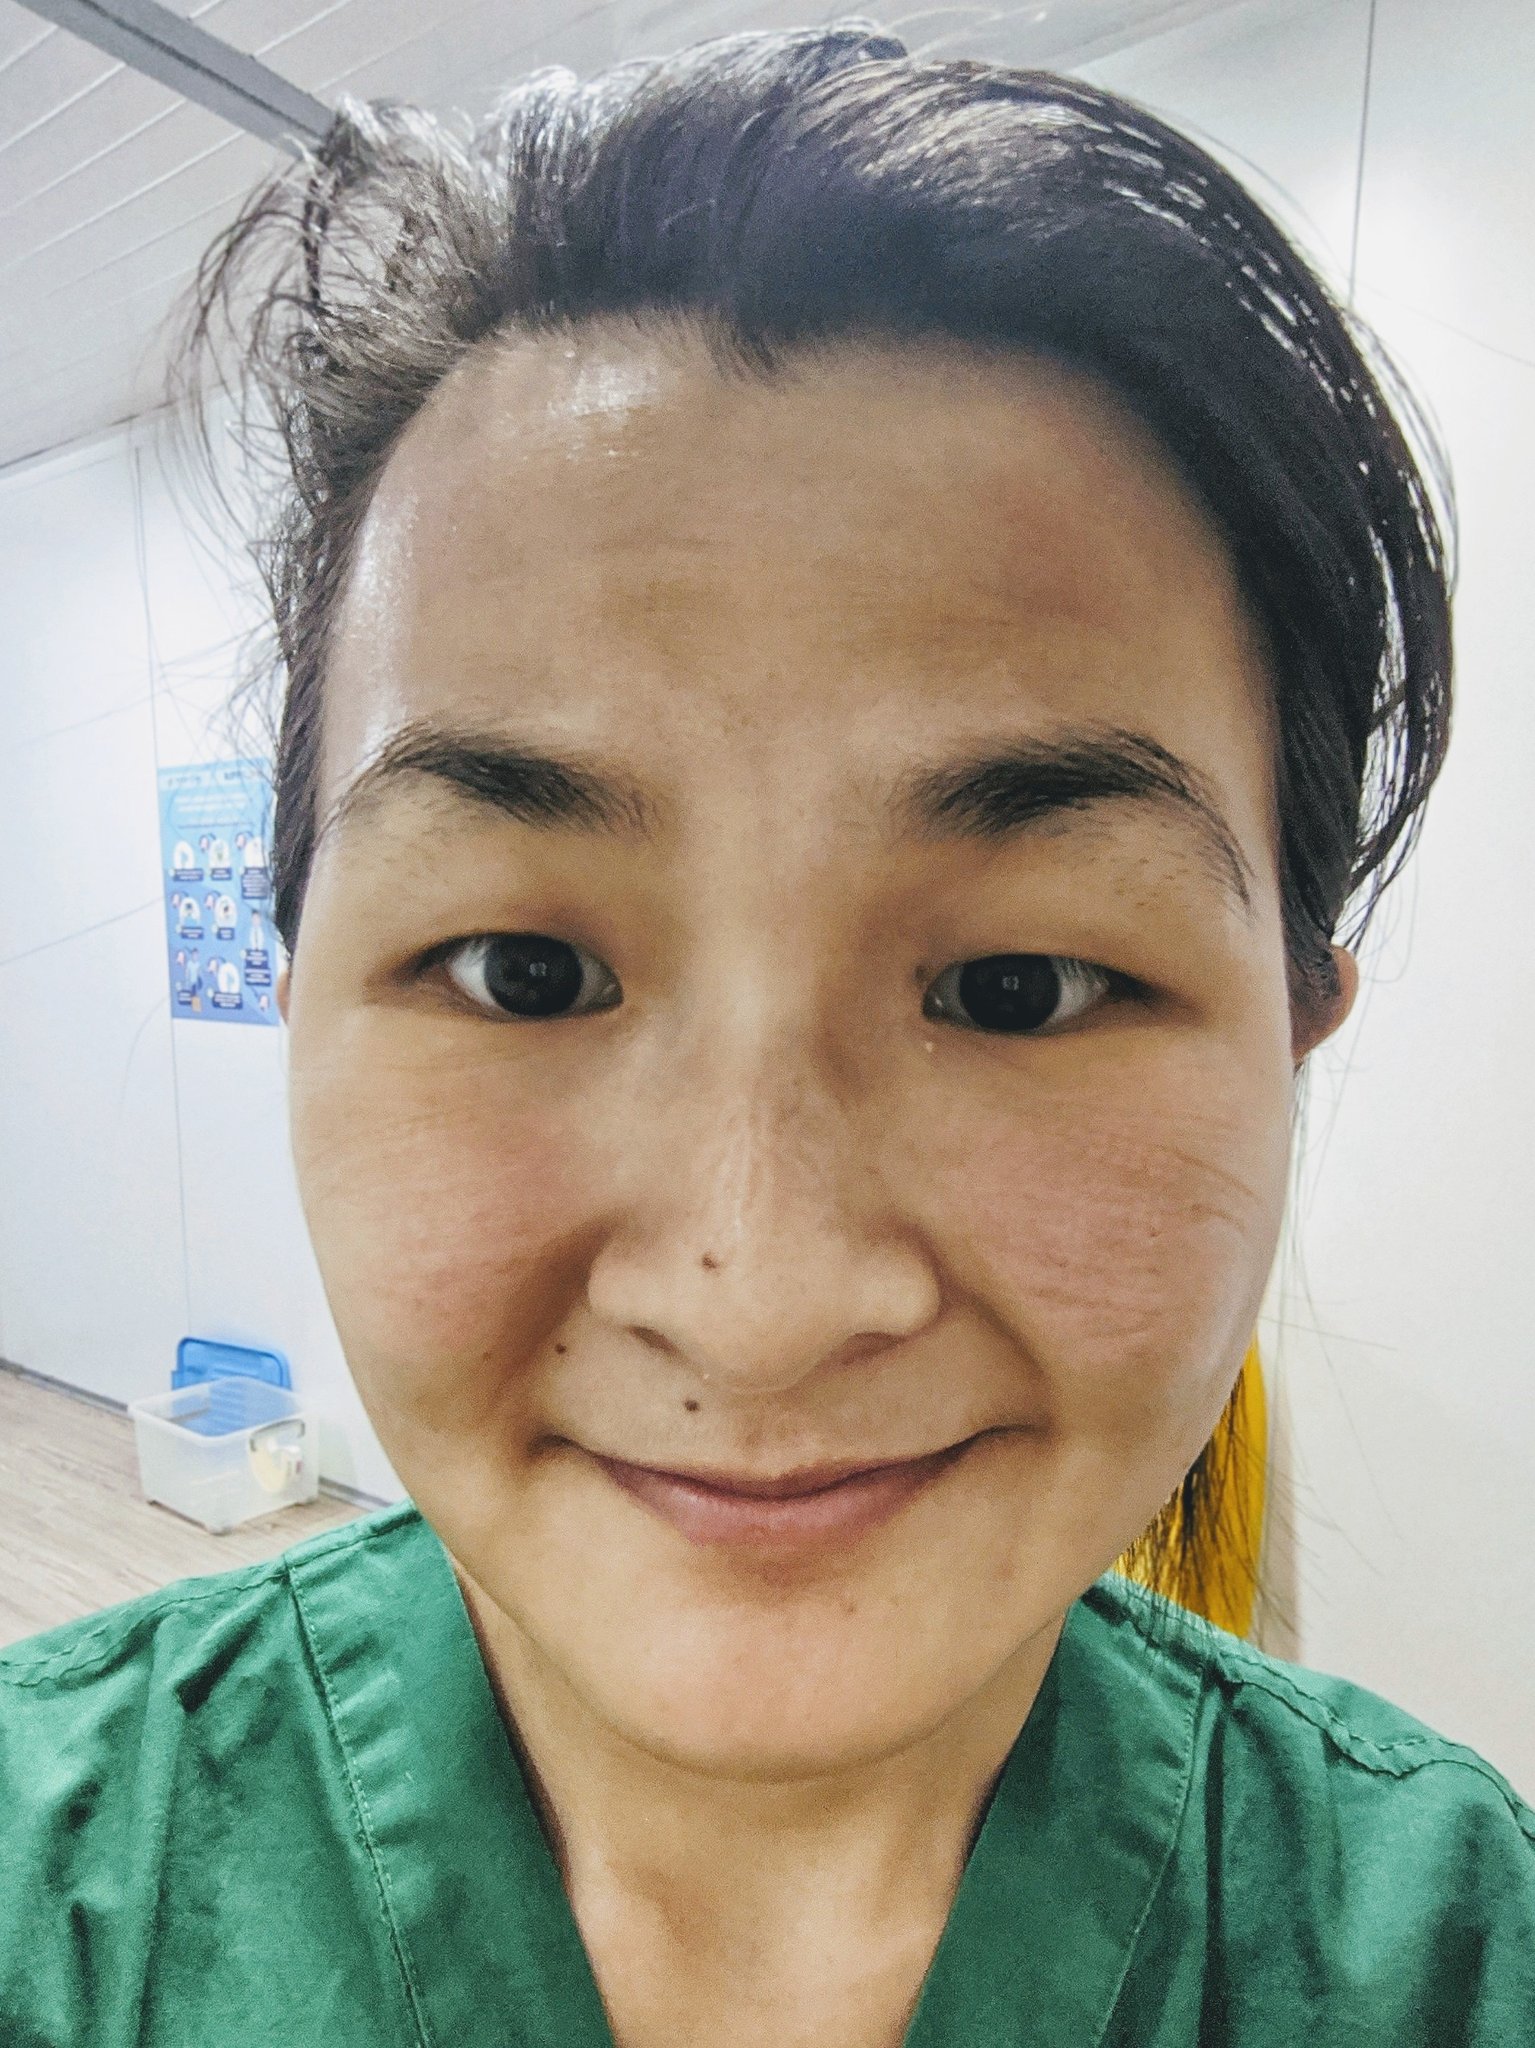 A female doctor takes a selfie with markings on her face from goggles